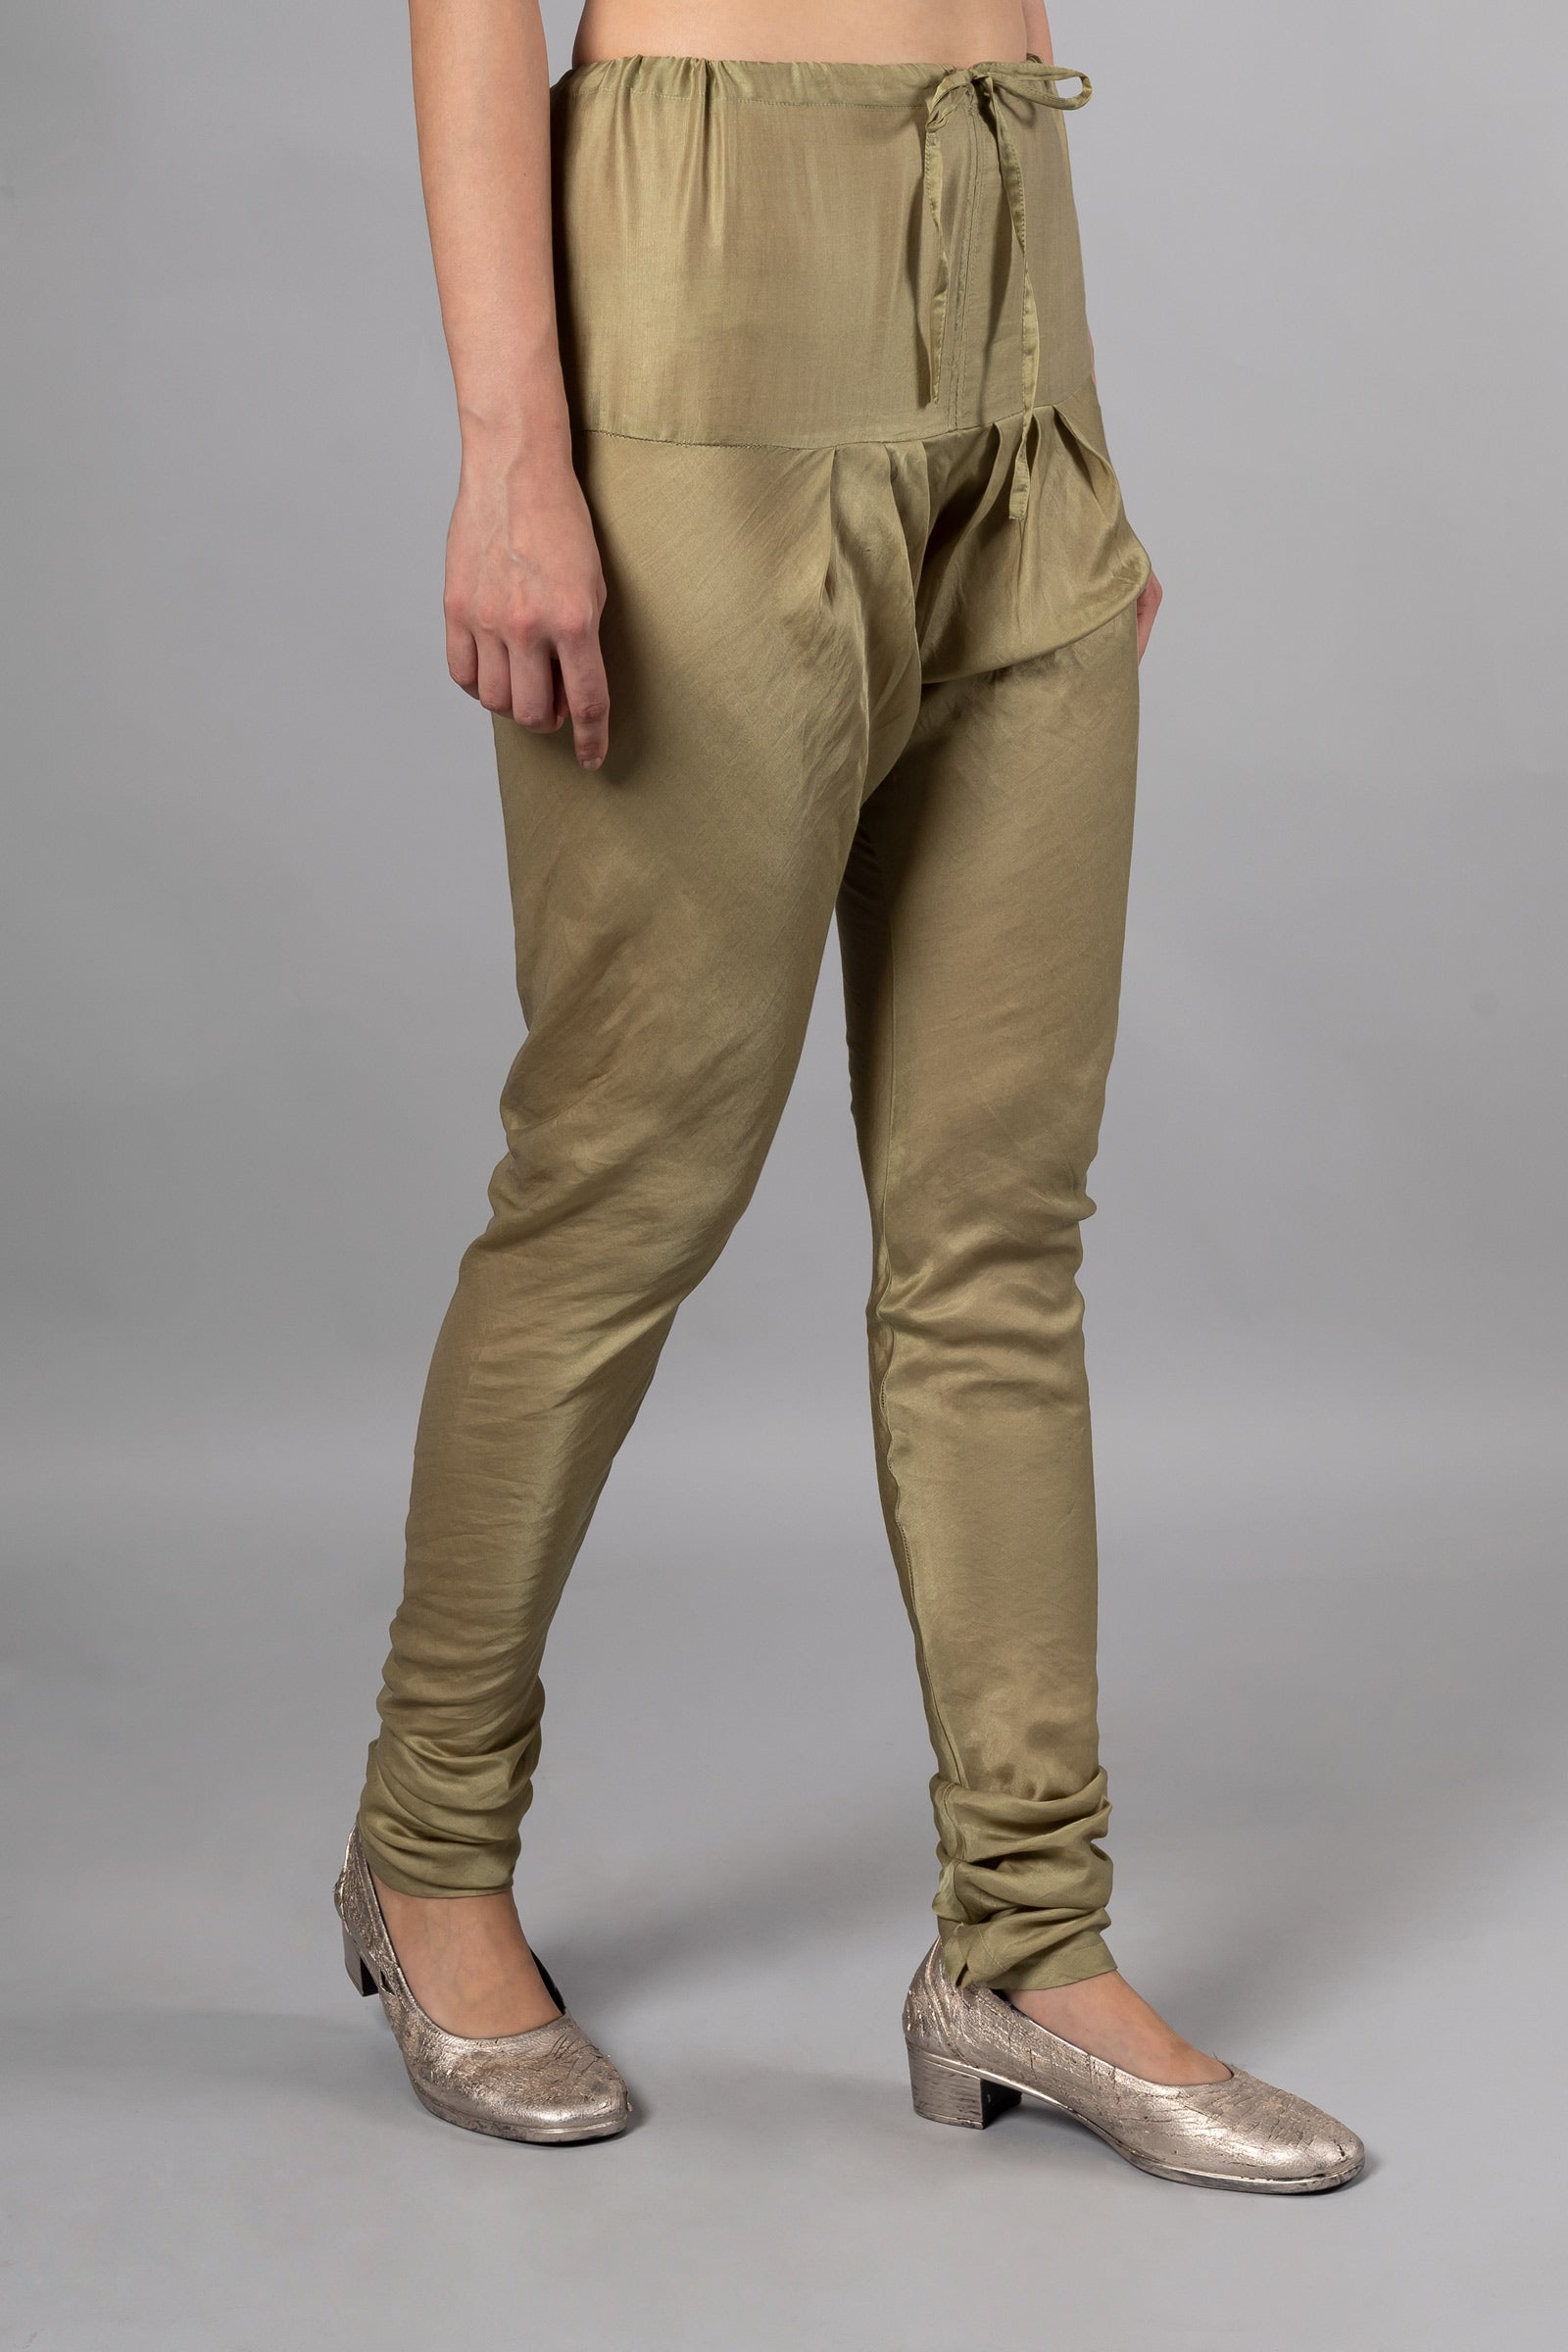 Buy Levi's Women's Relaxed Casual Pants (36887-0000_Beige at Amazon.in